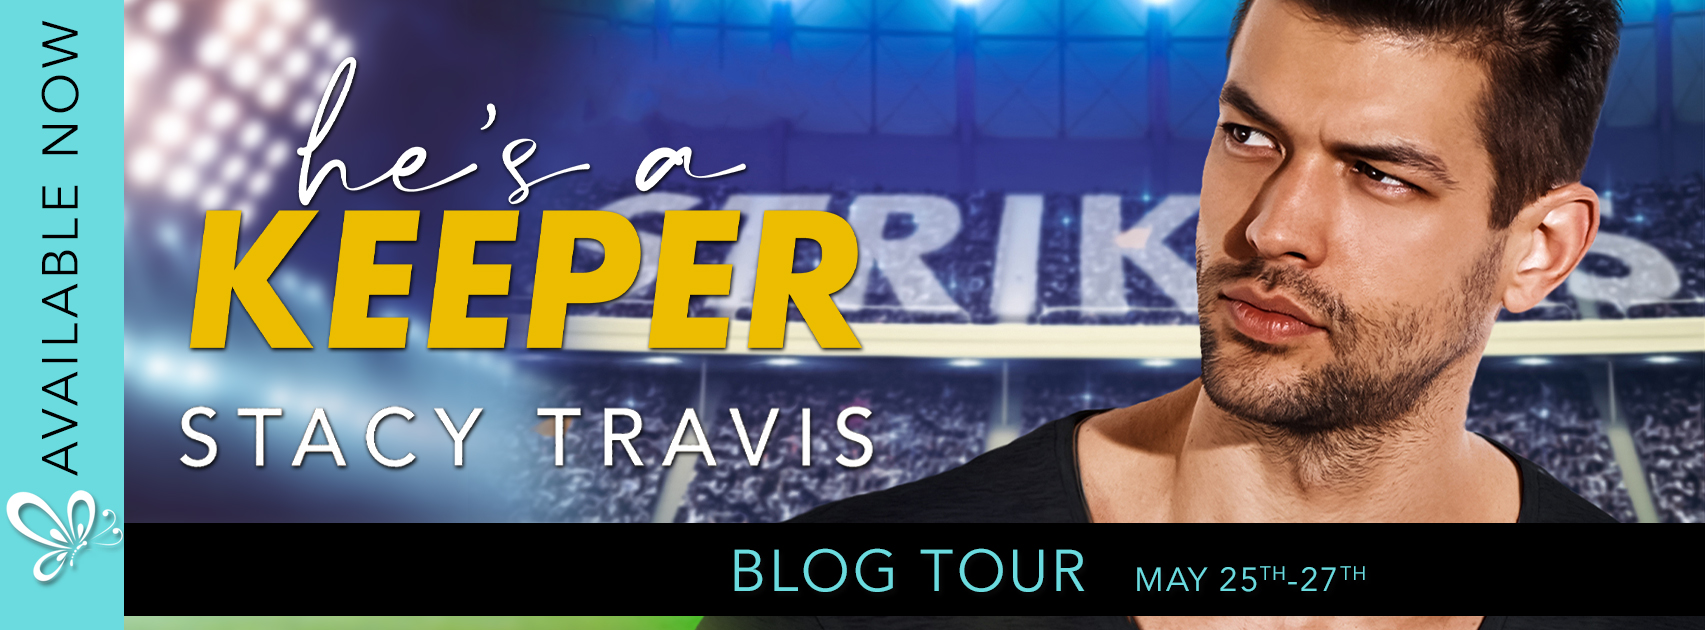 Grumpy Soccer Star Meets Librarian Anyone? | He's a Keeper by Stacy Travis ARC Review